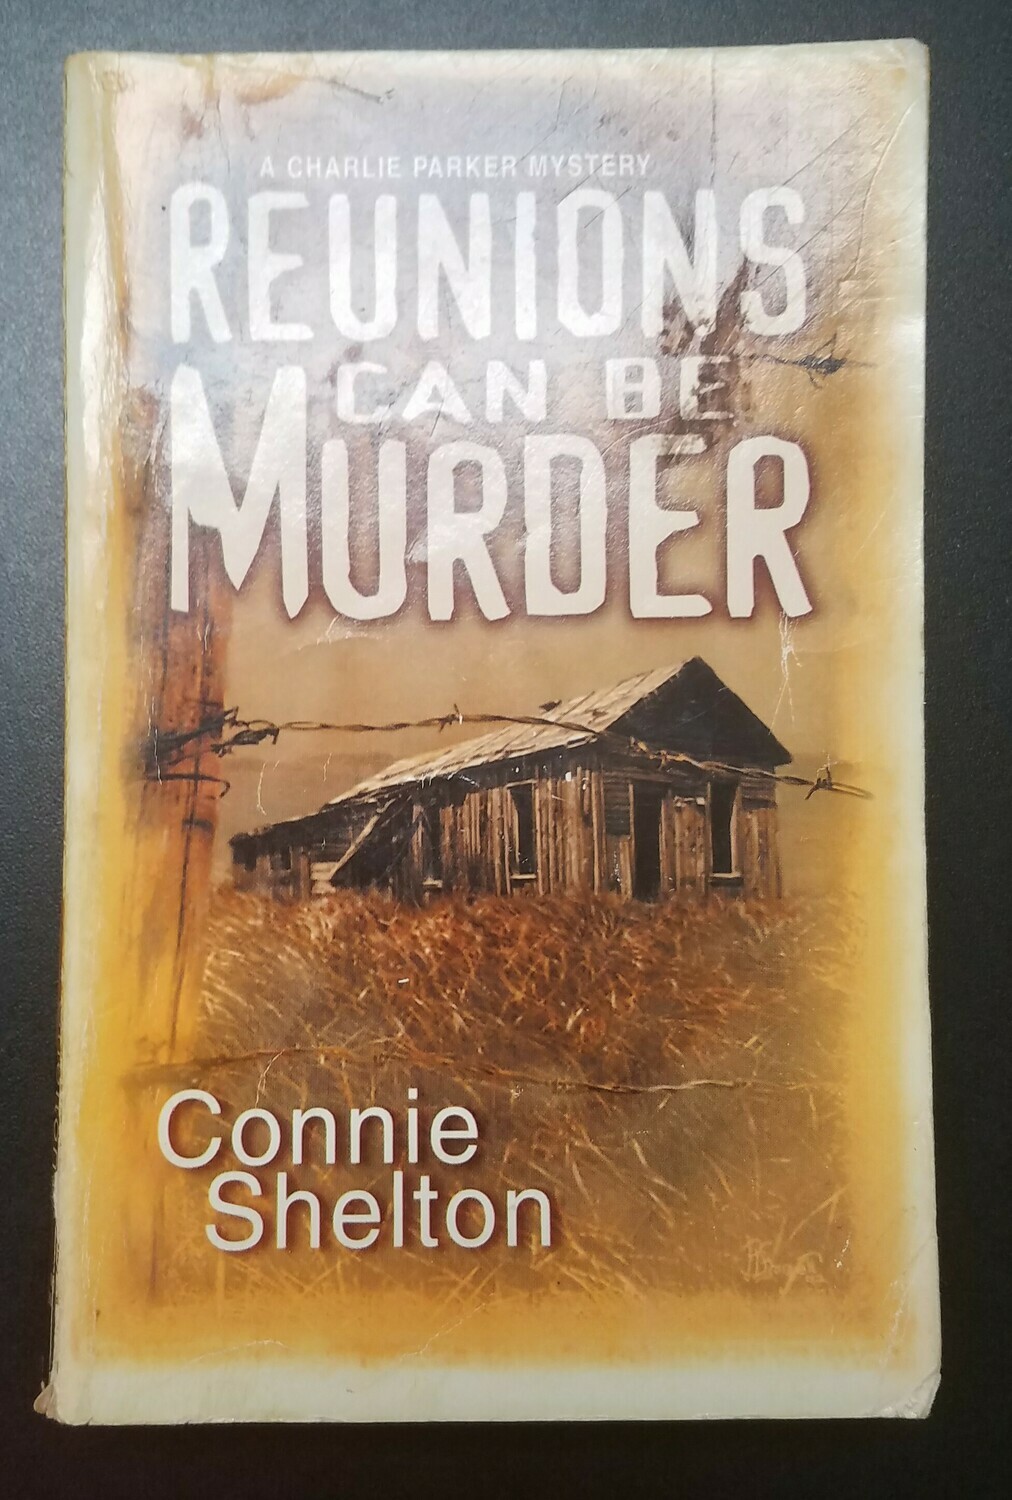 Reunions can be Murder by Connie Shelton